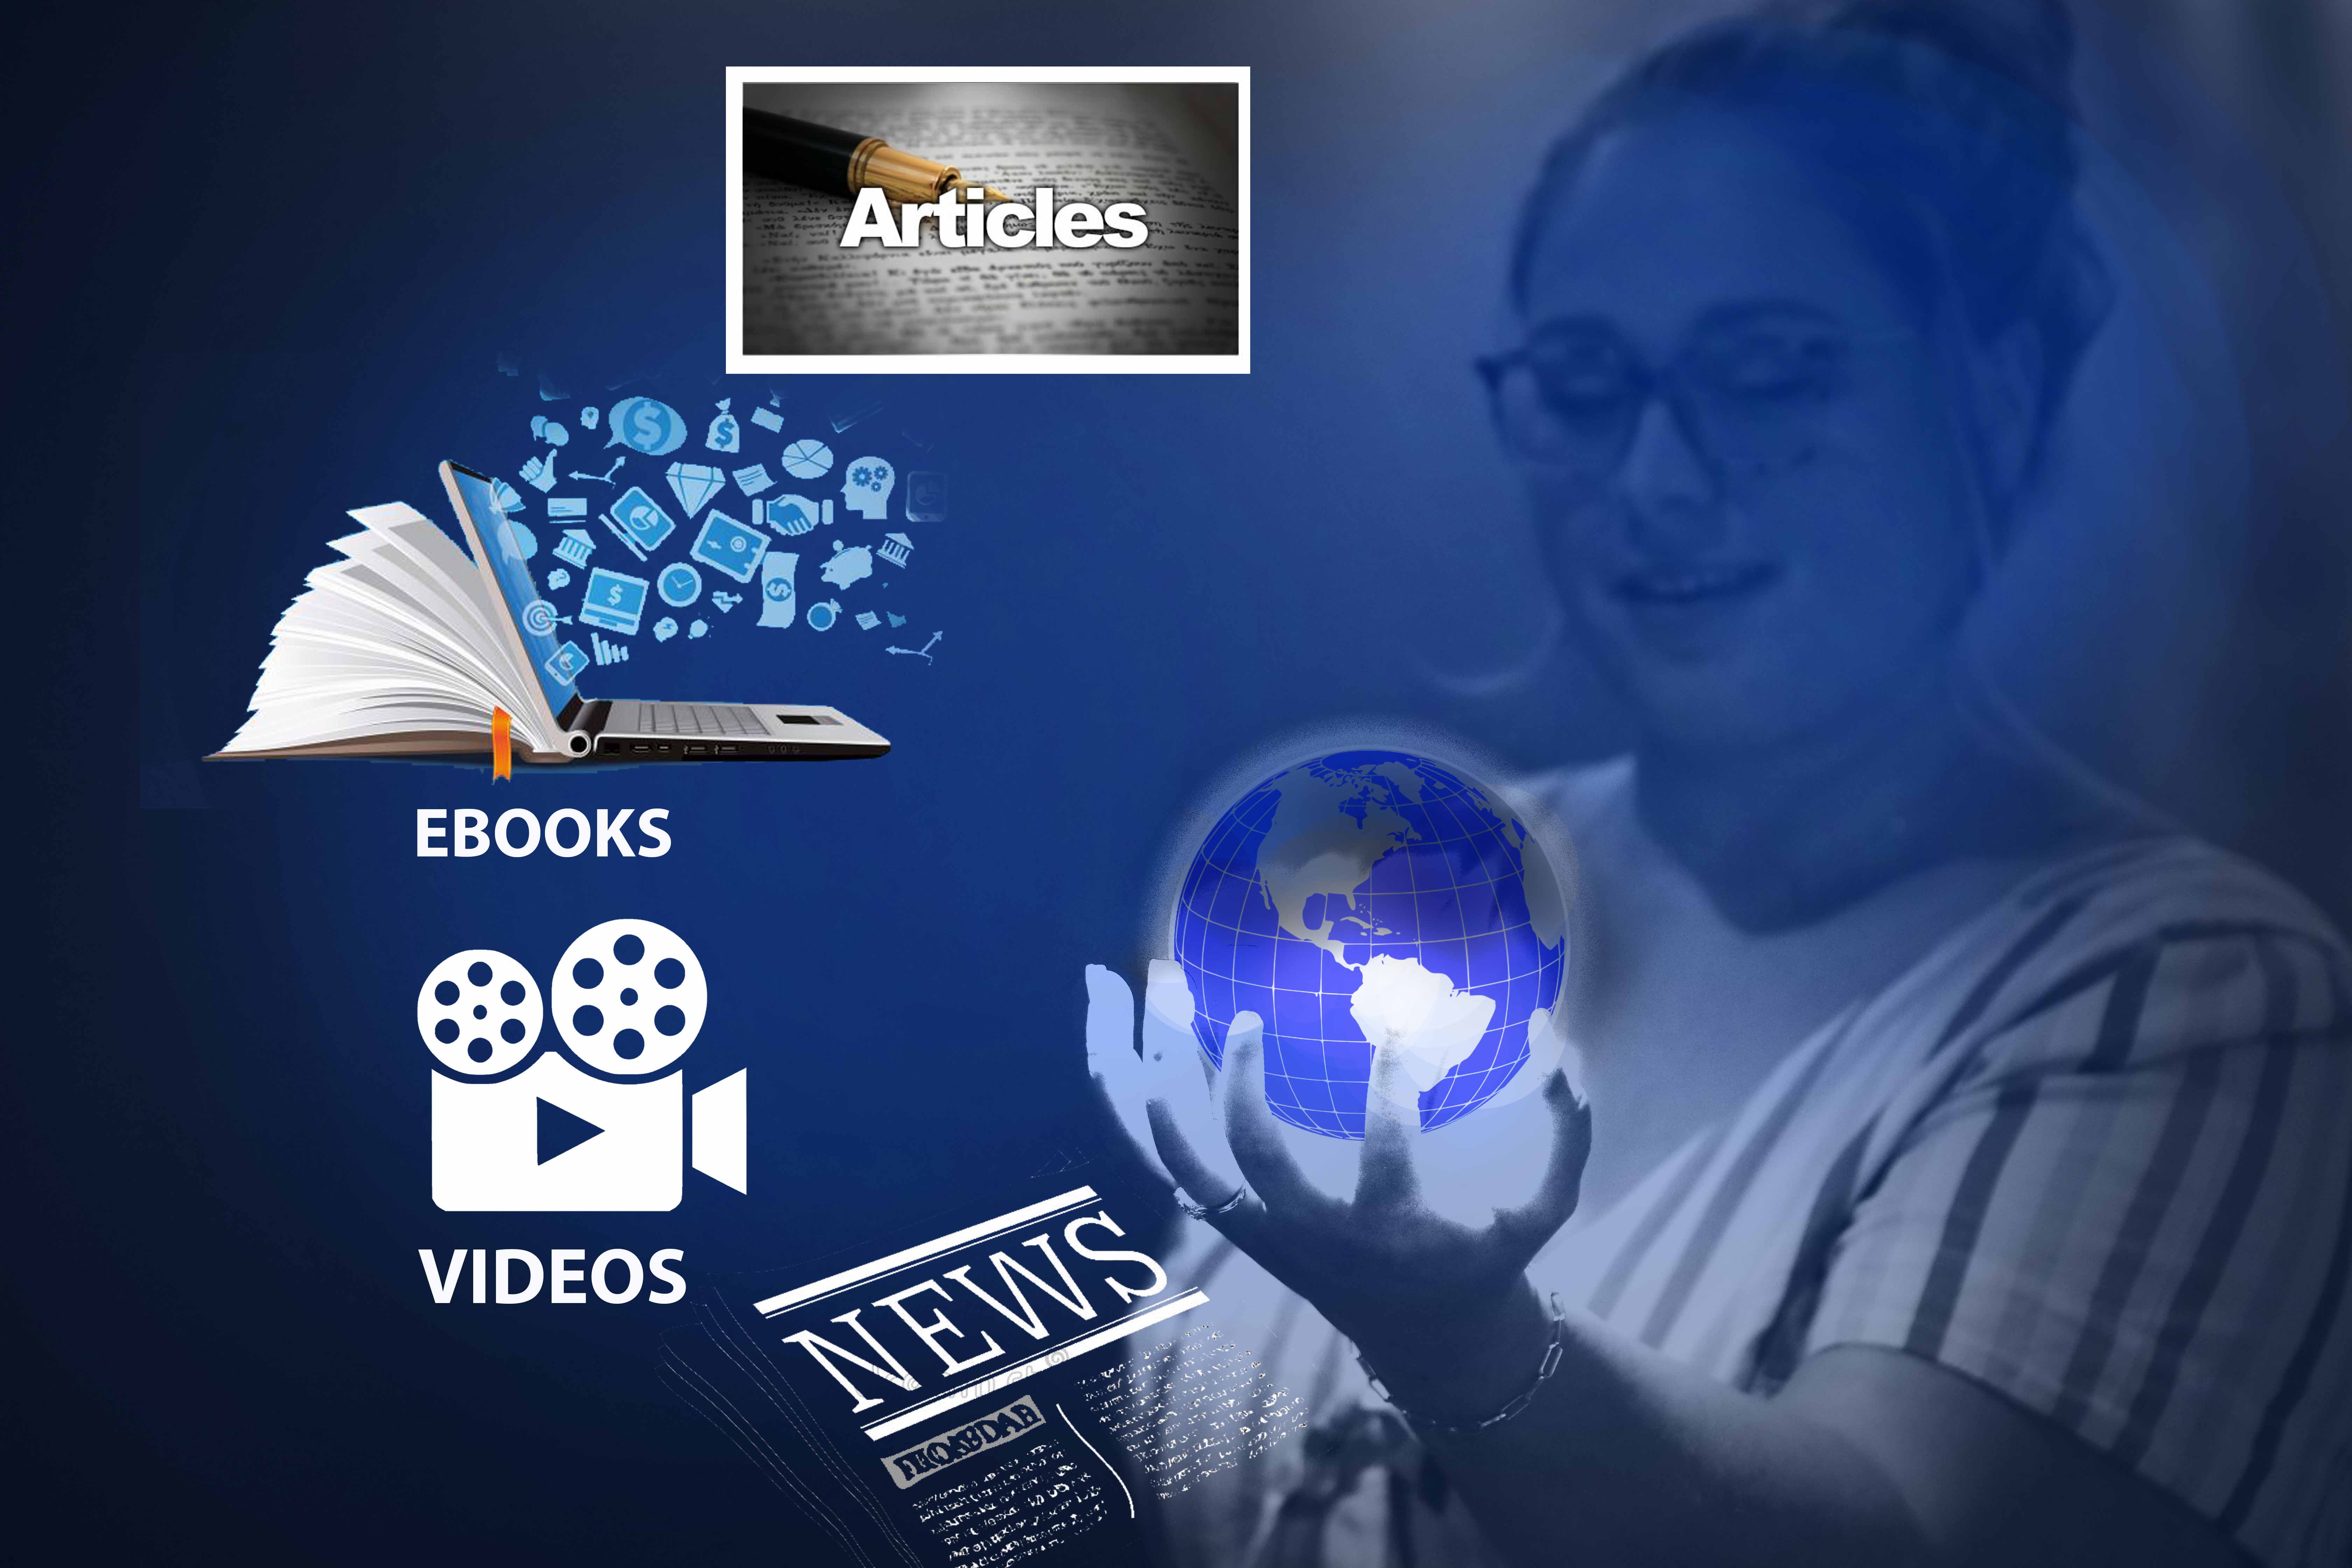 Student holding globe with "News", "Video", "ebooks", and "articles" icons around her